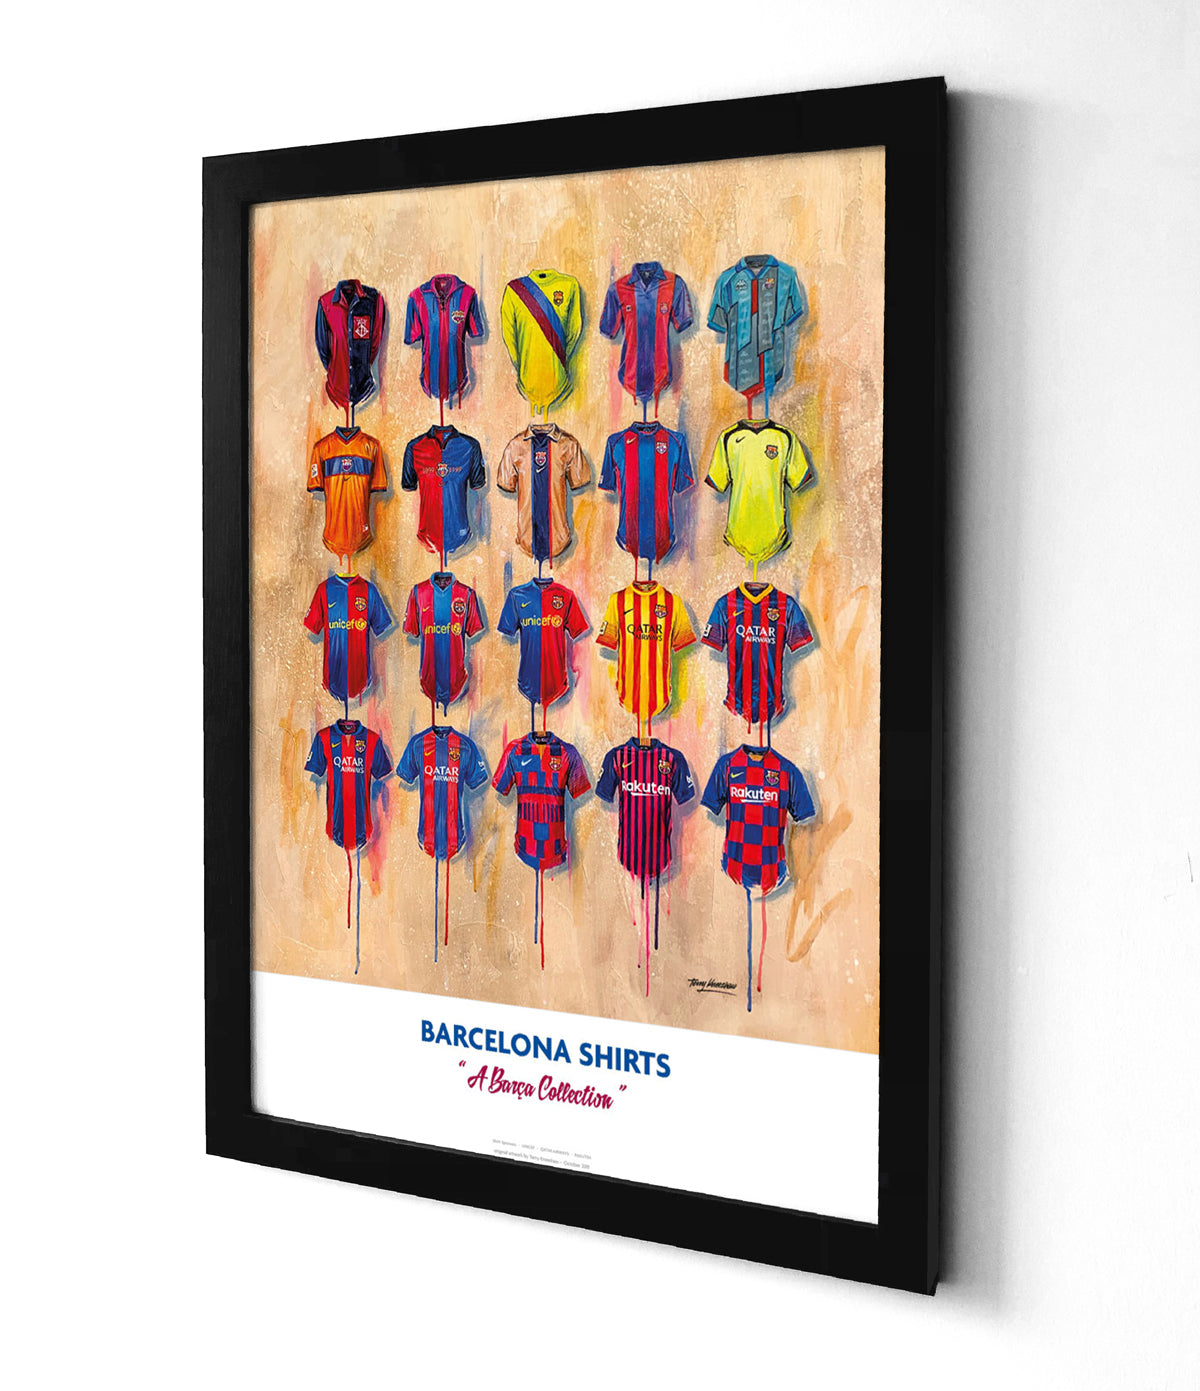 The Barcelona Personalised A2 limited edition print by Terry Kneeshaw features 20 iconic jerseys that span over the club's history. The customized print allows fans to choose their favorite player's name and number to be included on a selected jersey. The design highlights the club's rich history, including the iconic jerseys of legends like Johan Cruyff and Lionel Messi. The print makes for a perfect gift for any Barcelona fan looking to display their love for the club.